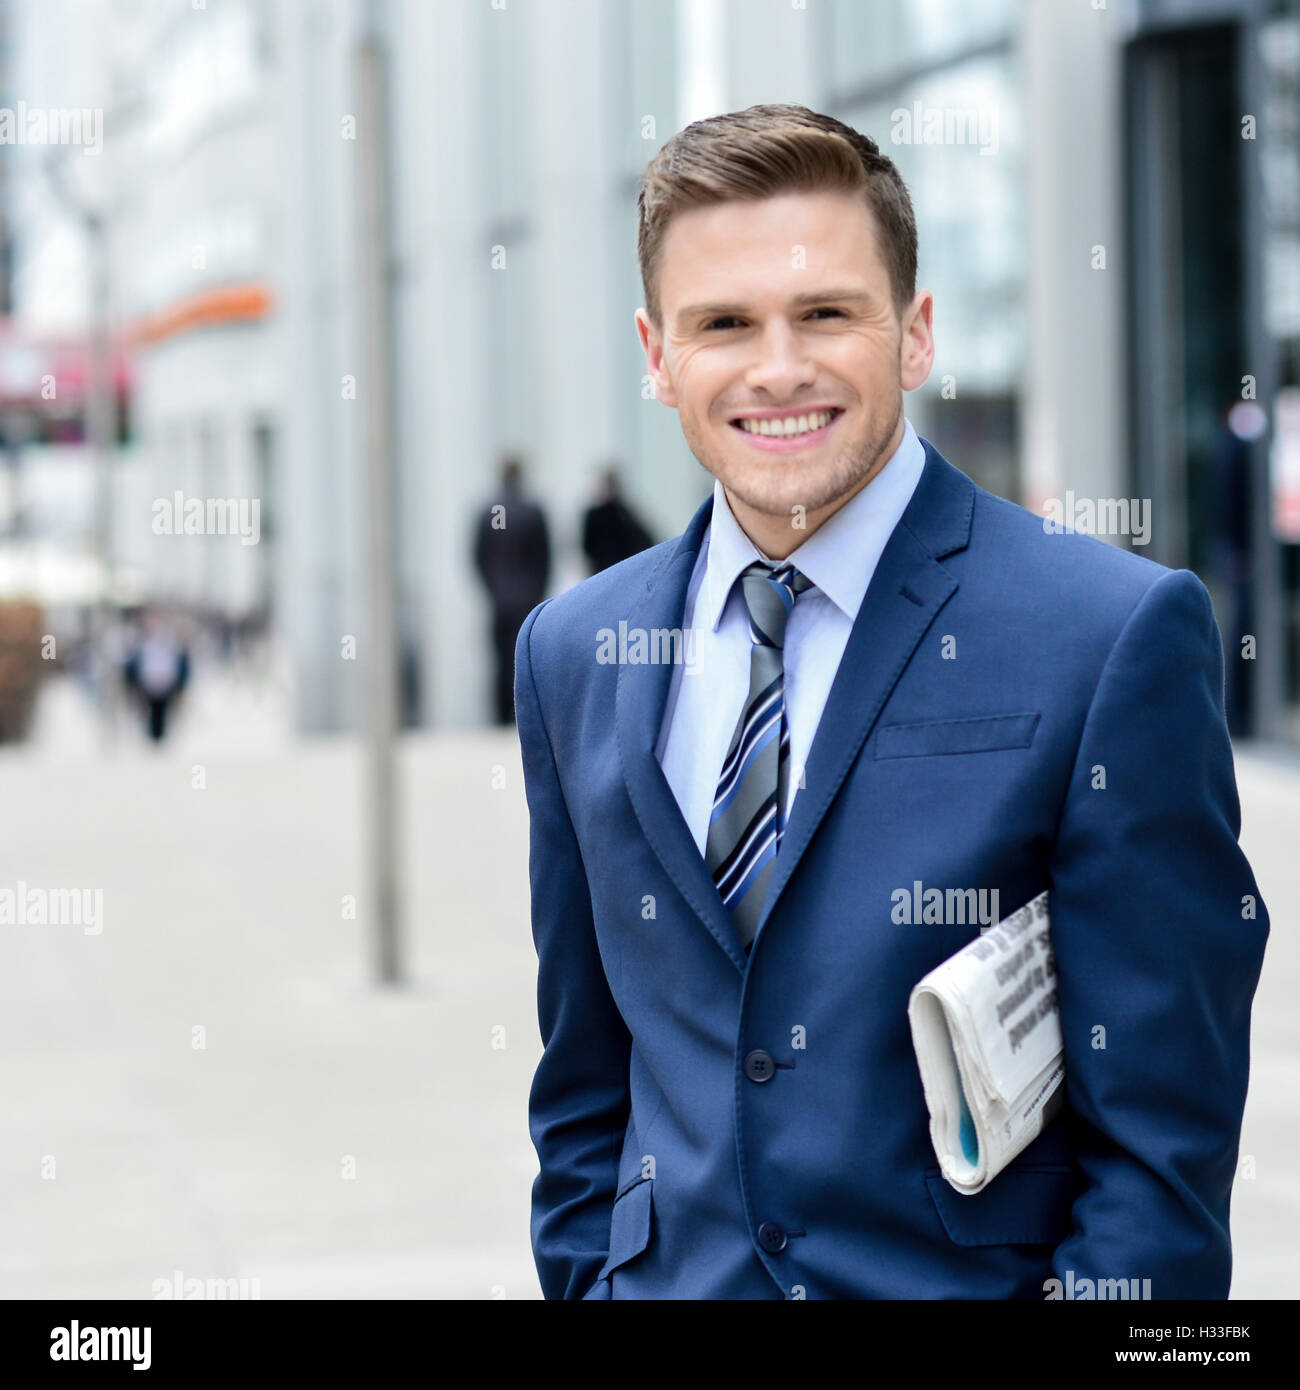 Successful businessman holding newspaper Banque D'Images